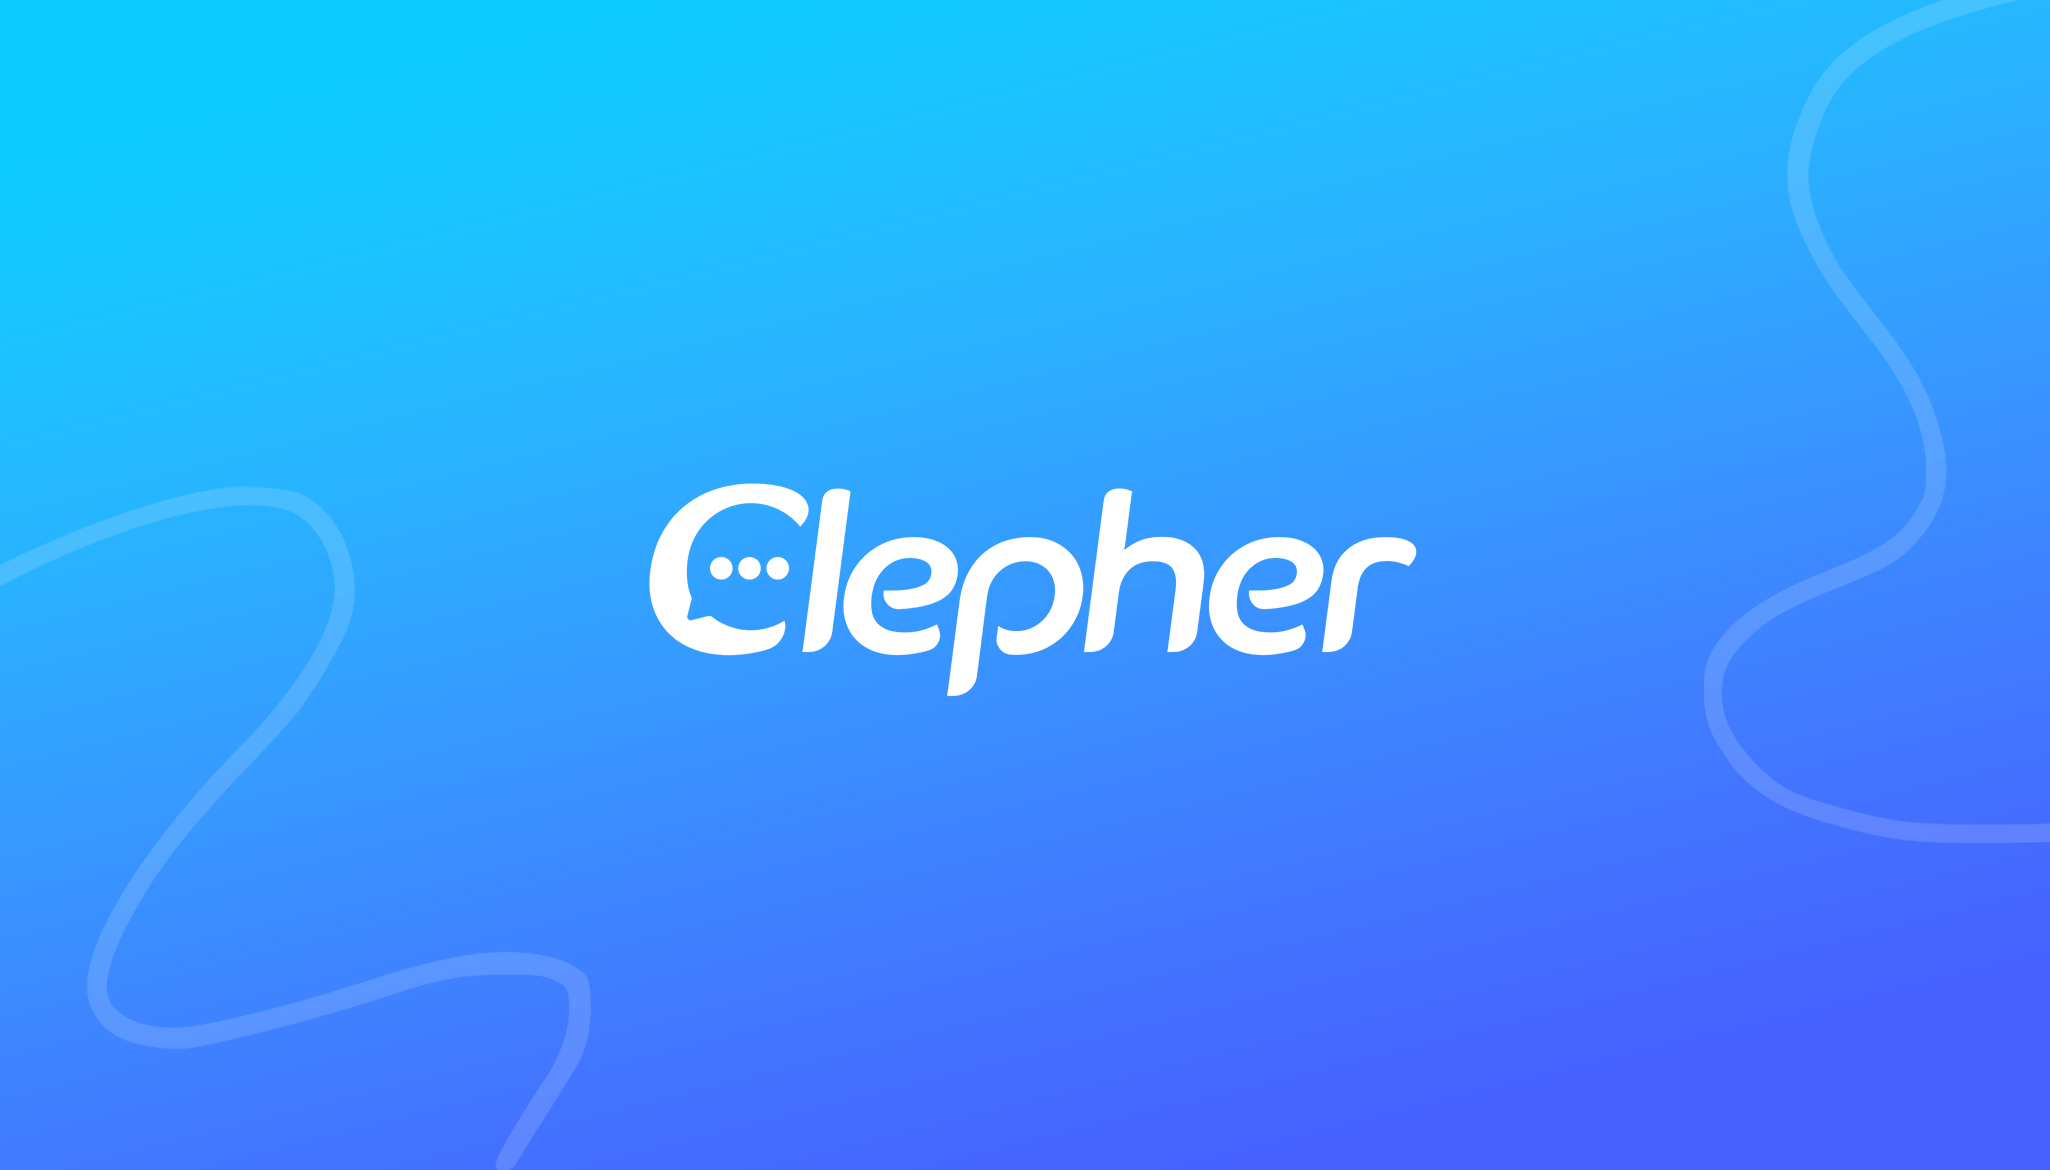 Be Compliant with the Facebook Messenger Policy changes through Clepher. Click Here to Discover the Potential of Marketing with Chatbots on Messenger!